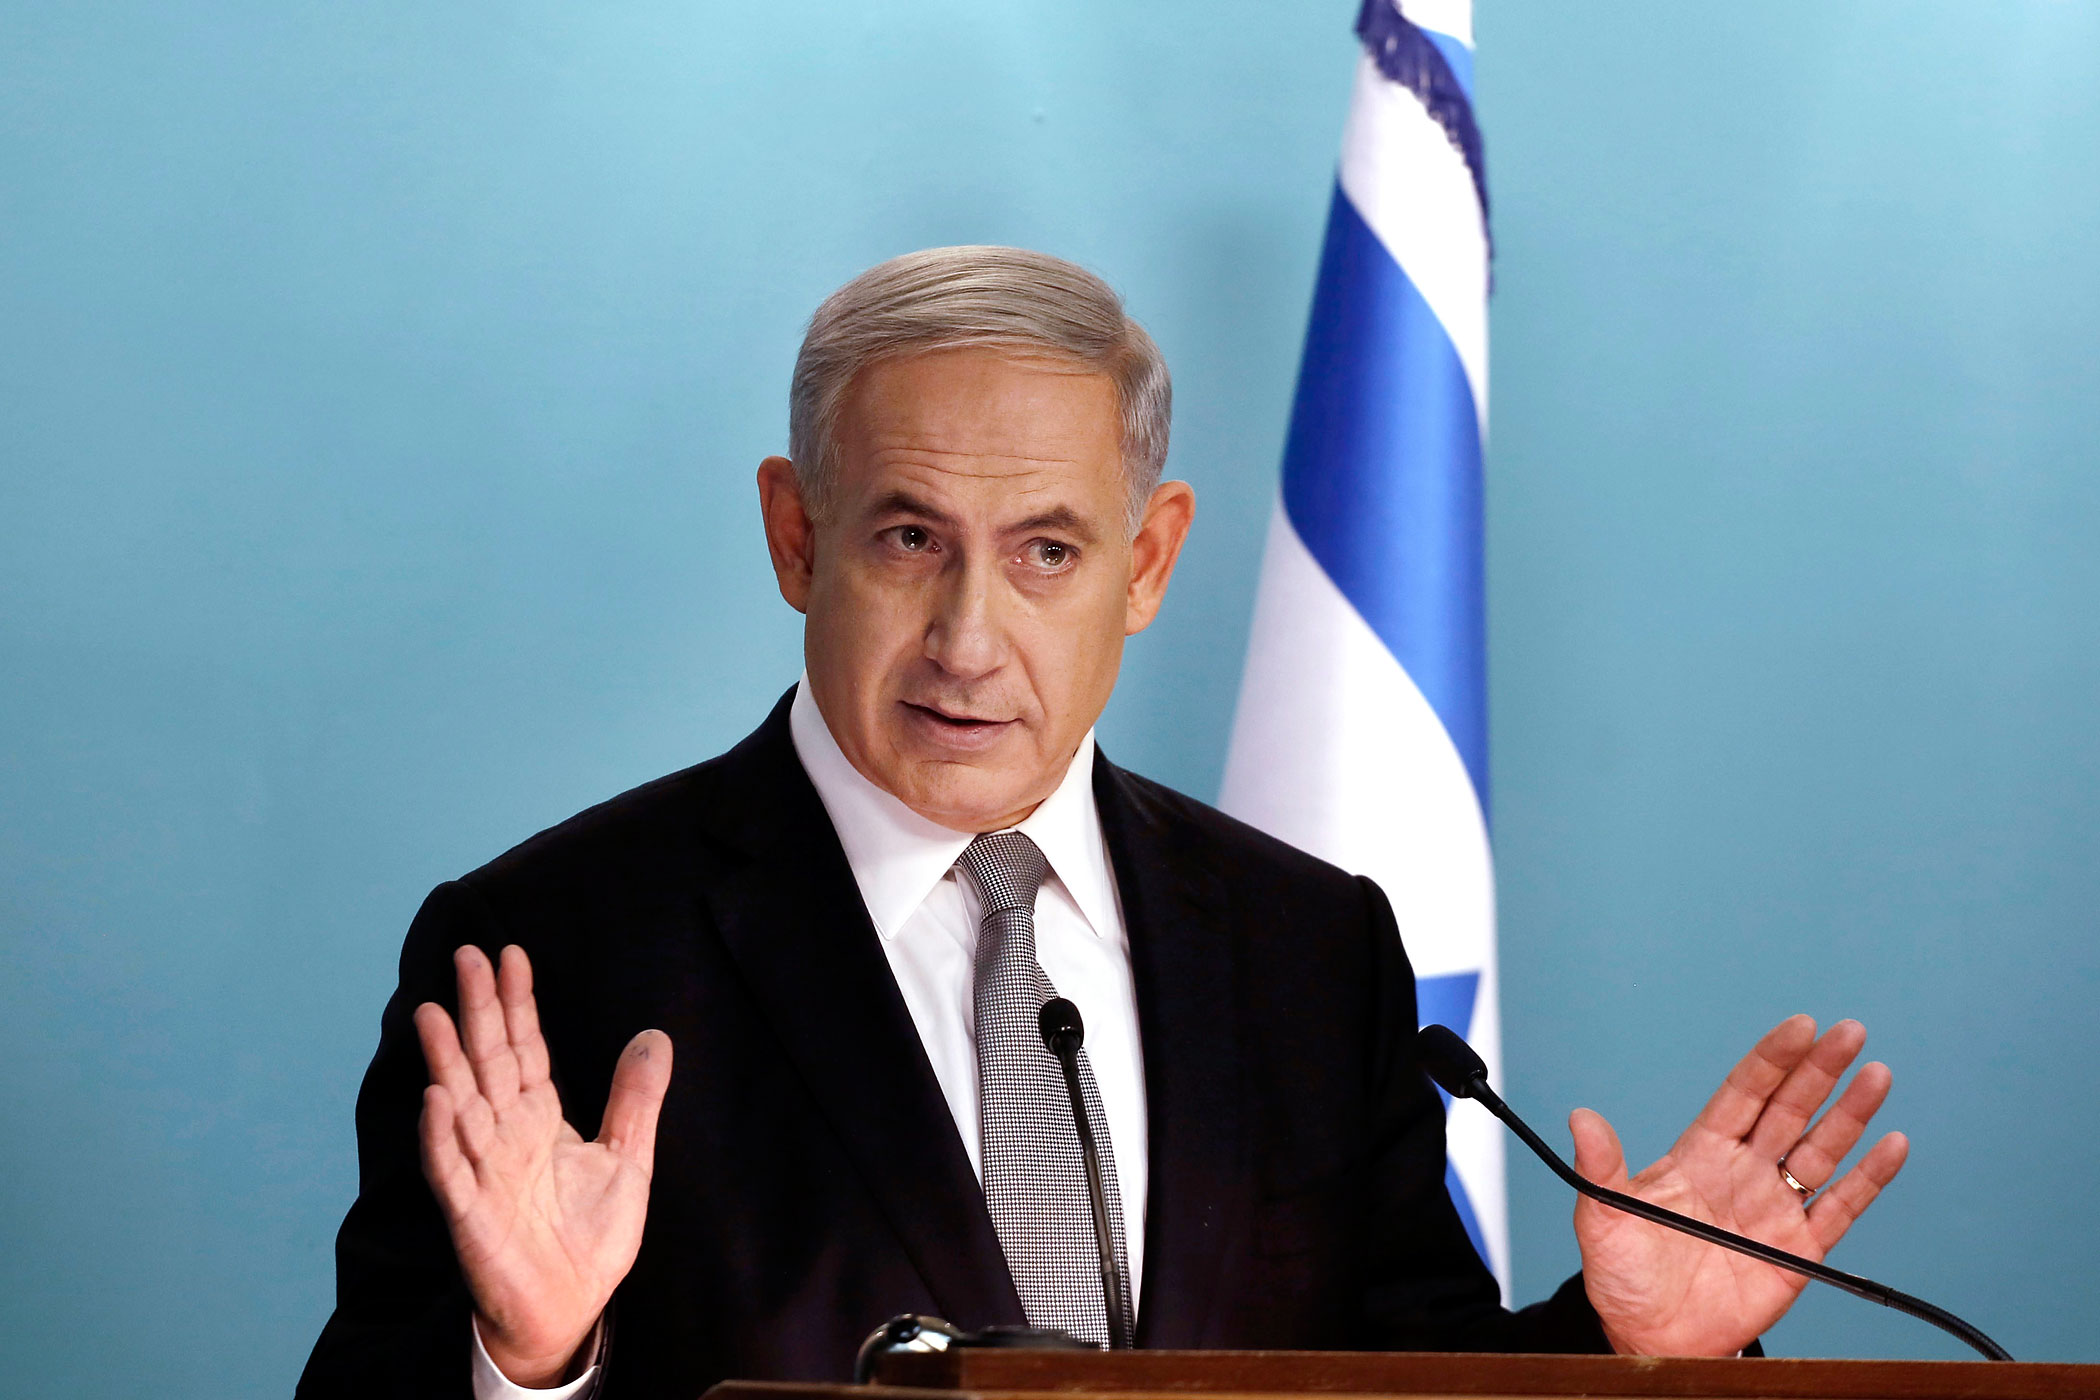 Israel's Prime Minister Netanyahu speaks during a news conference at his office in Jerusalem